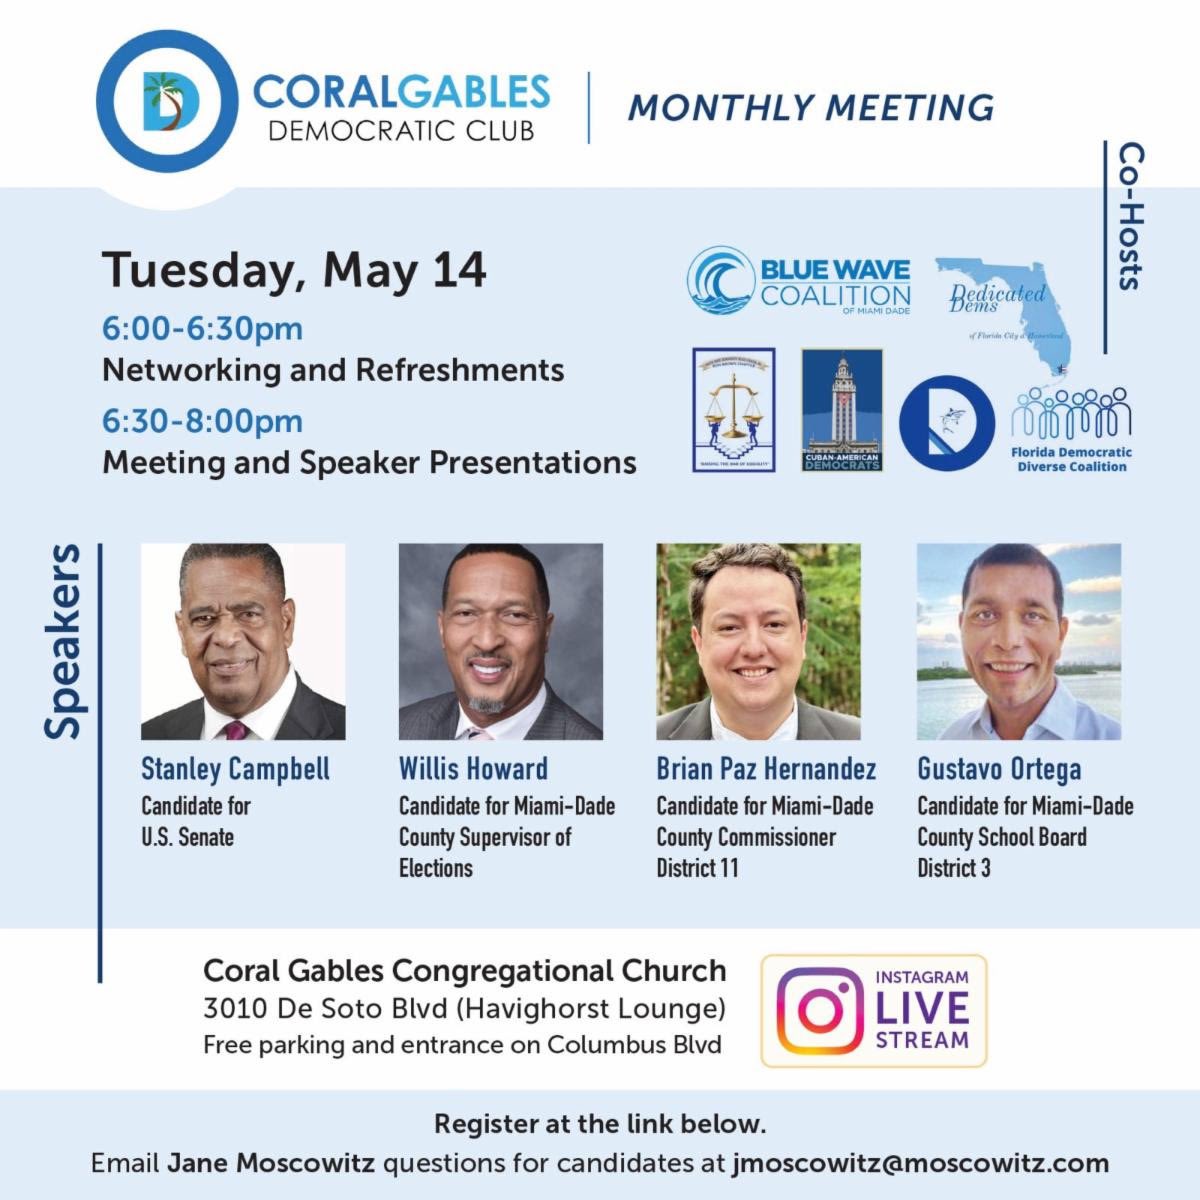 Thankful for the opportunity and invitation to participate in the Coral Gables Democratic Club Monthly Meeting “Meet the Candidates Forum.” 

#StanleyforFlorida #Campbell2024 #CoralGables #Miami #Broward #FL #Florida #USSenate #SouthFlorida #MiamiDade #Miami